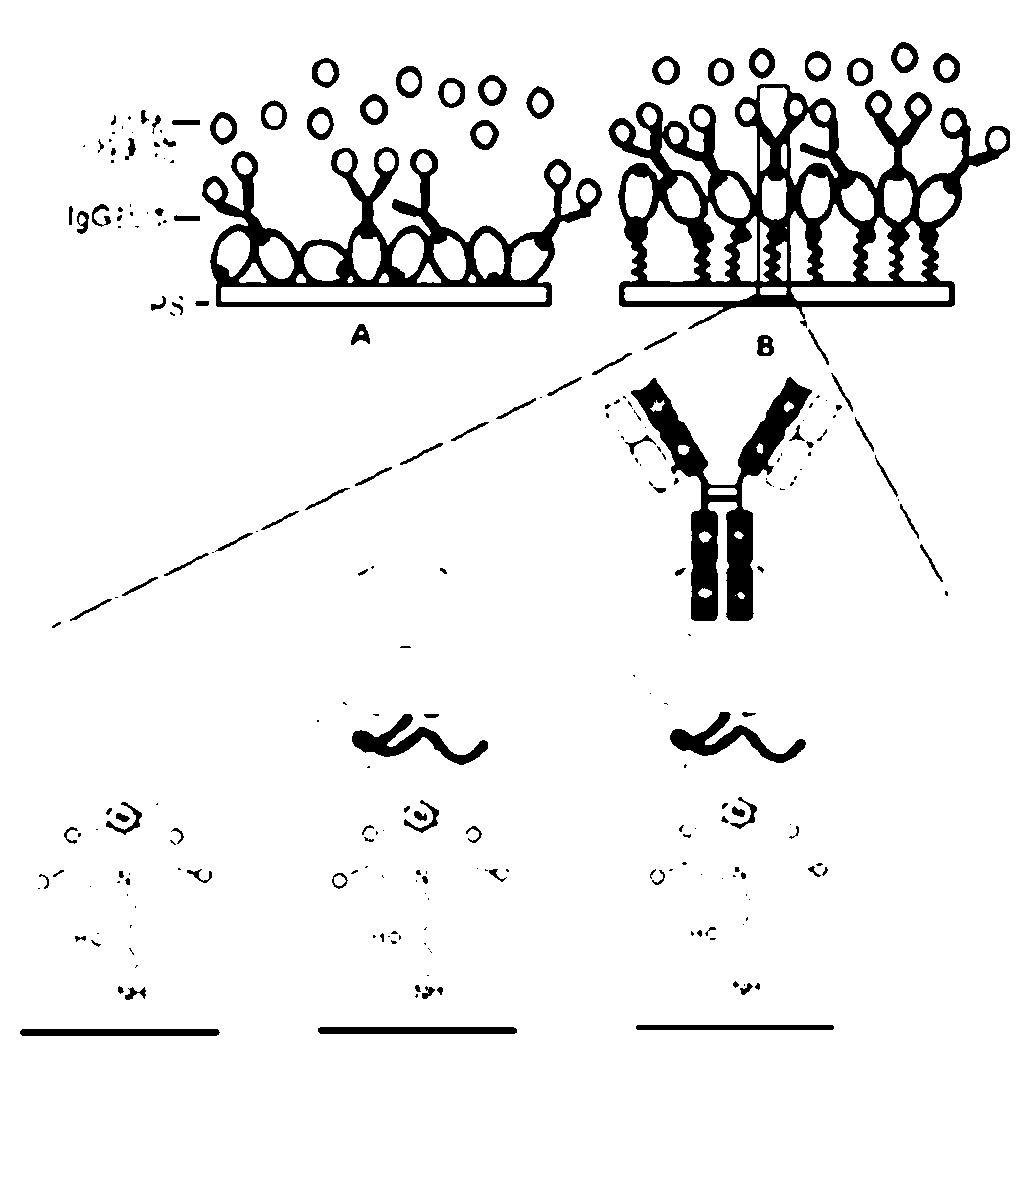 Stereotactic fixing method of IgG antibody on surface of polystyrene carrier